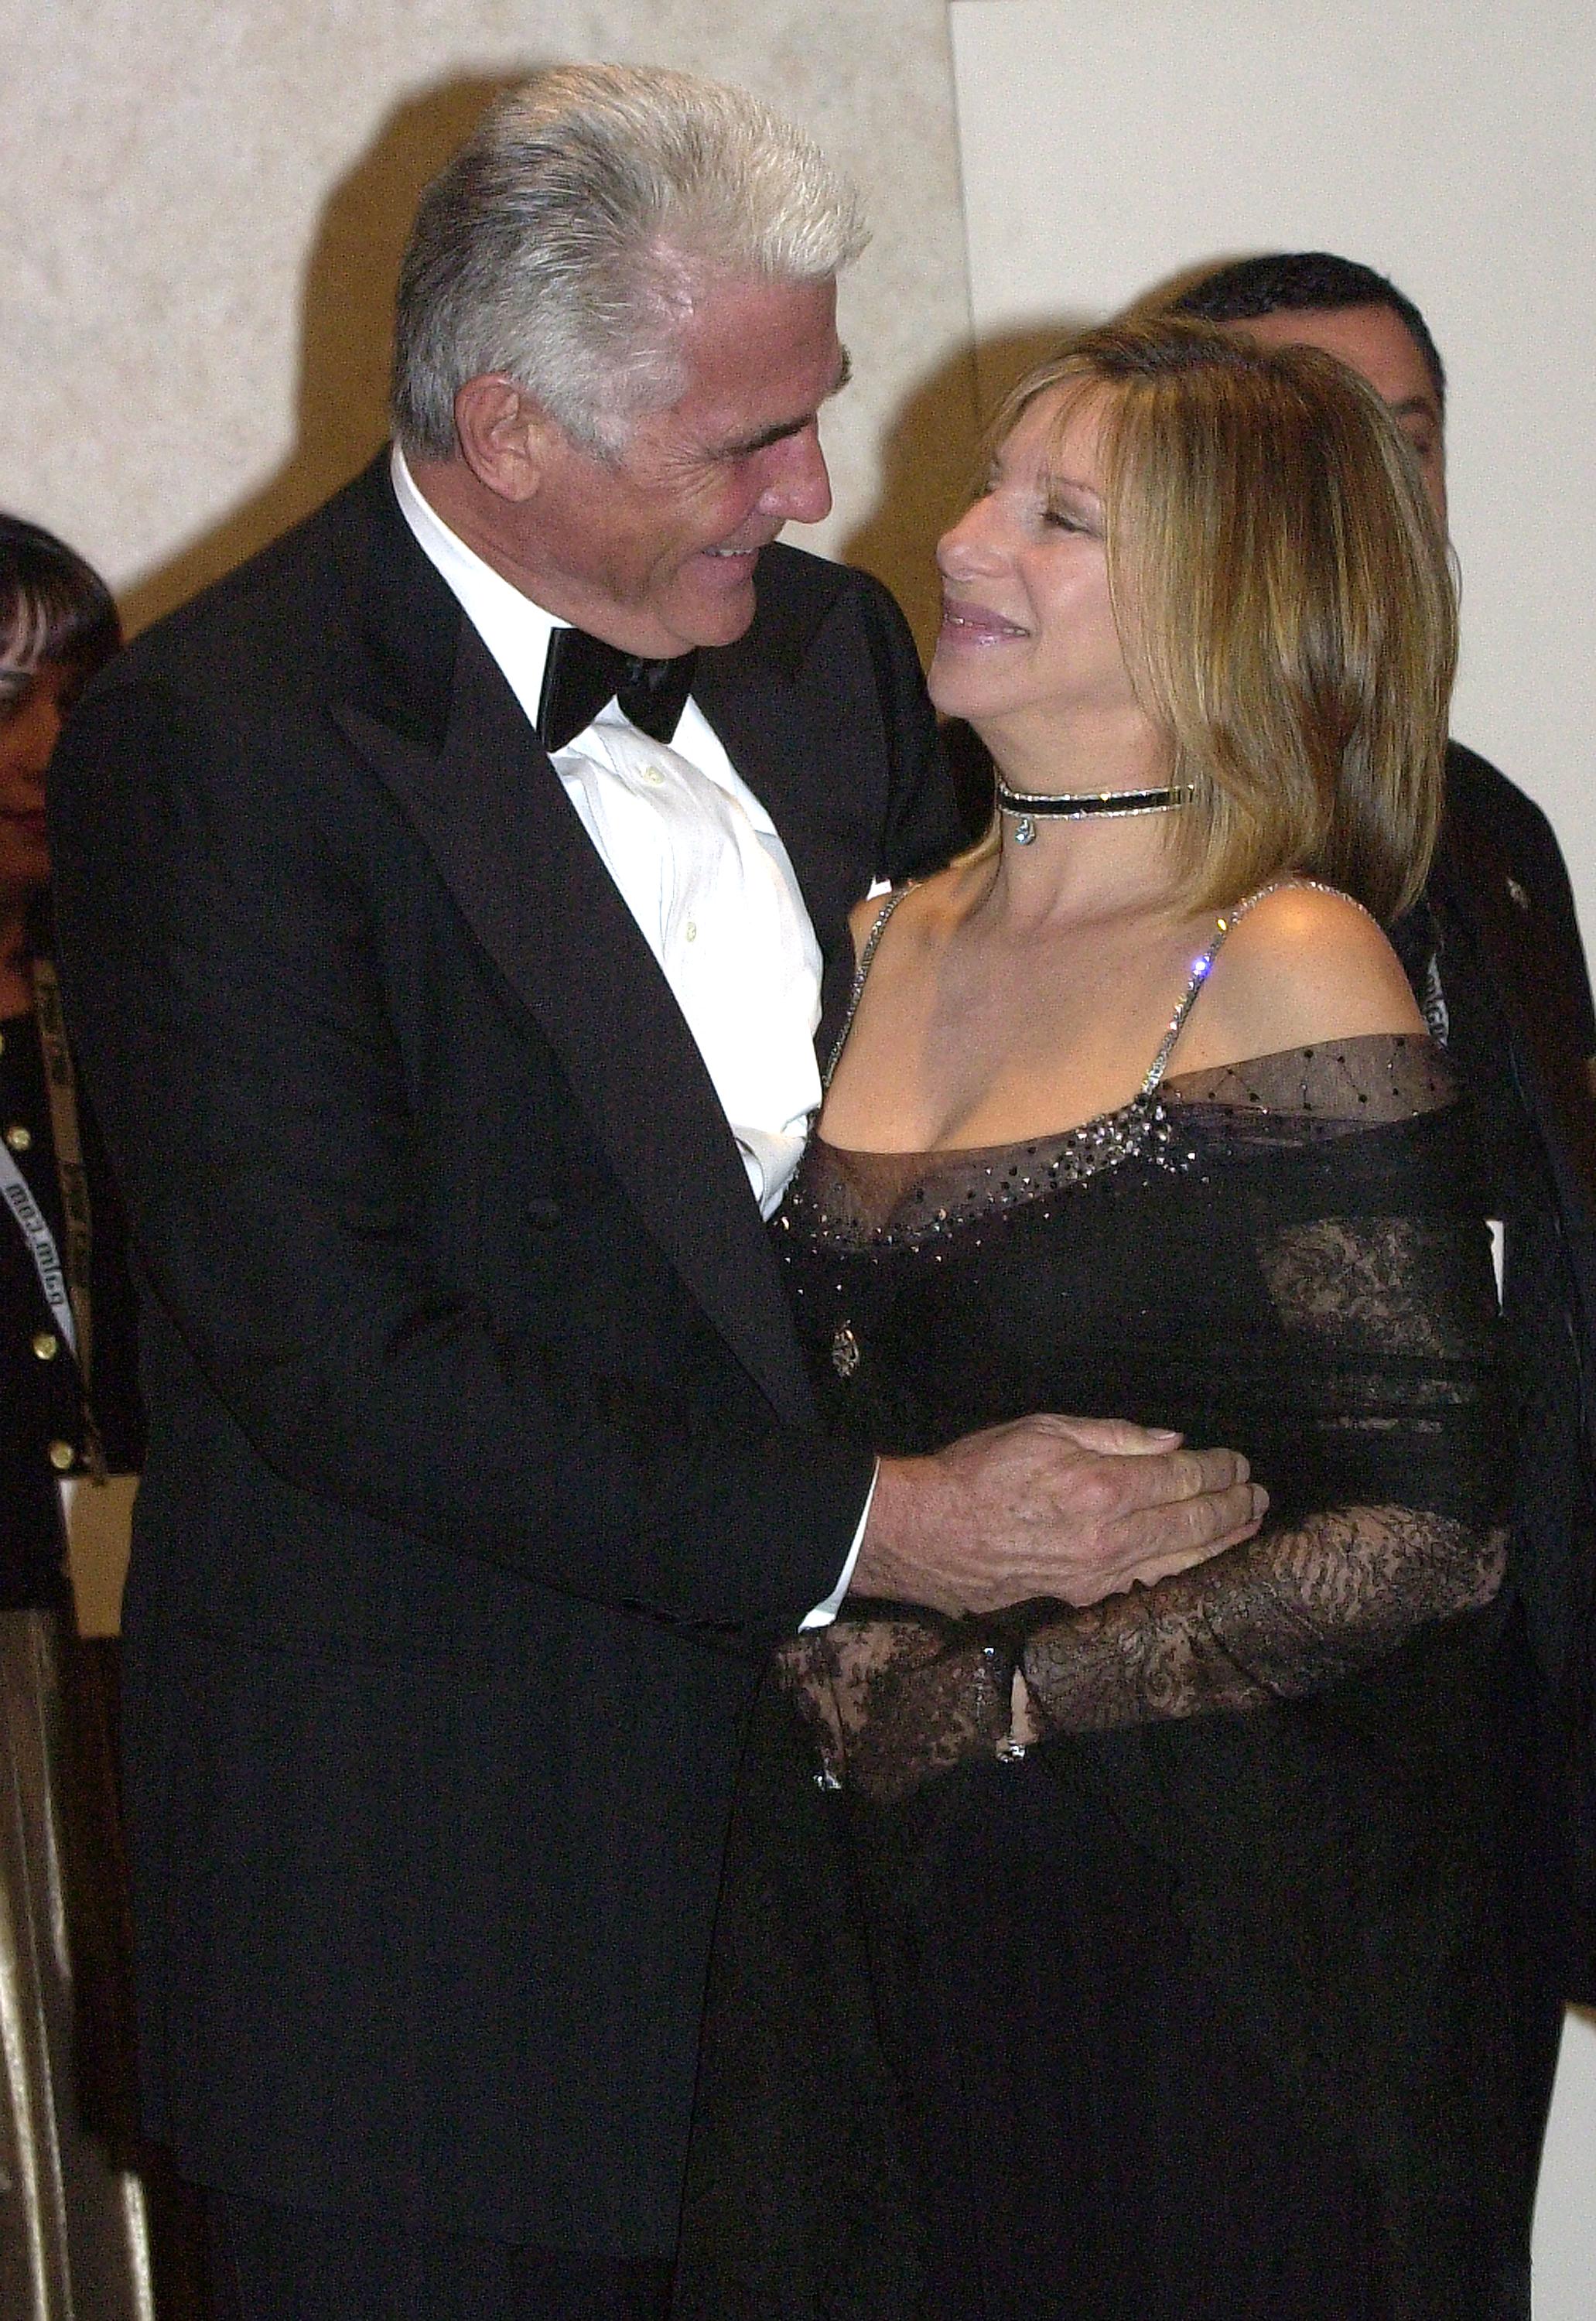 James Brolin and Barbra Streisand at the American Film Institute Life Achievement Award gala in Beverly Hills, California on February 22, 2001 | Source: Getty Images